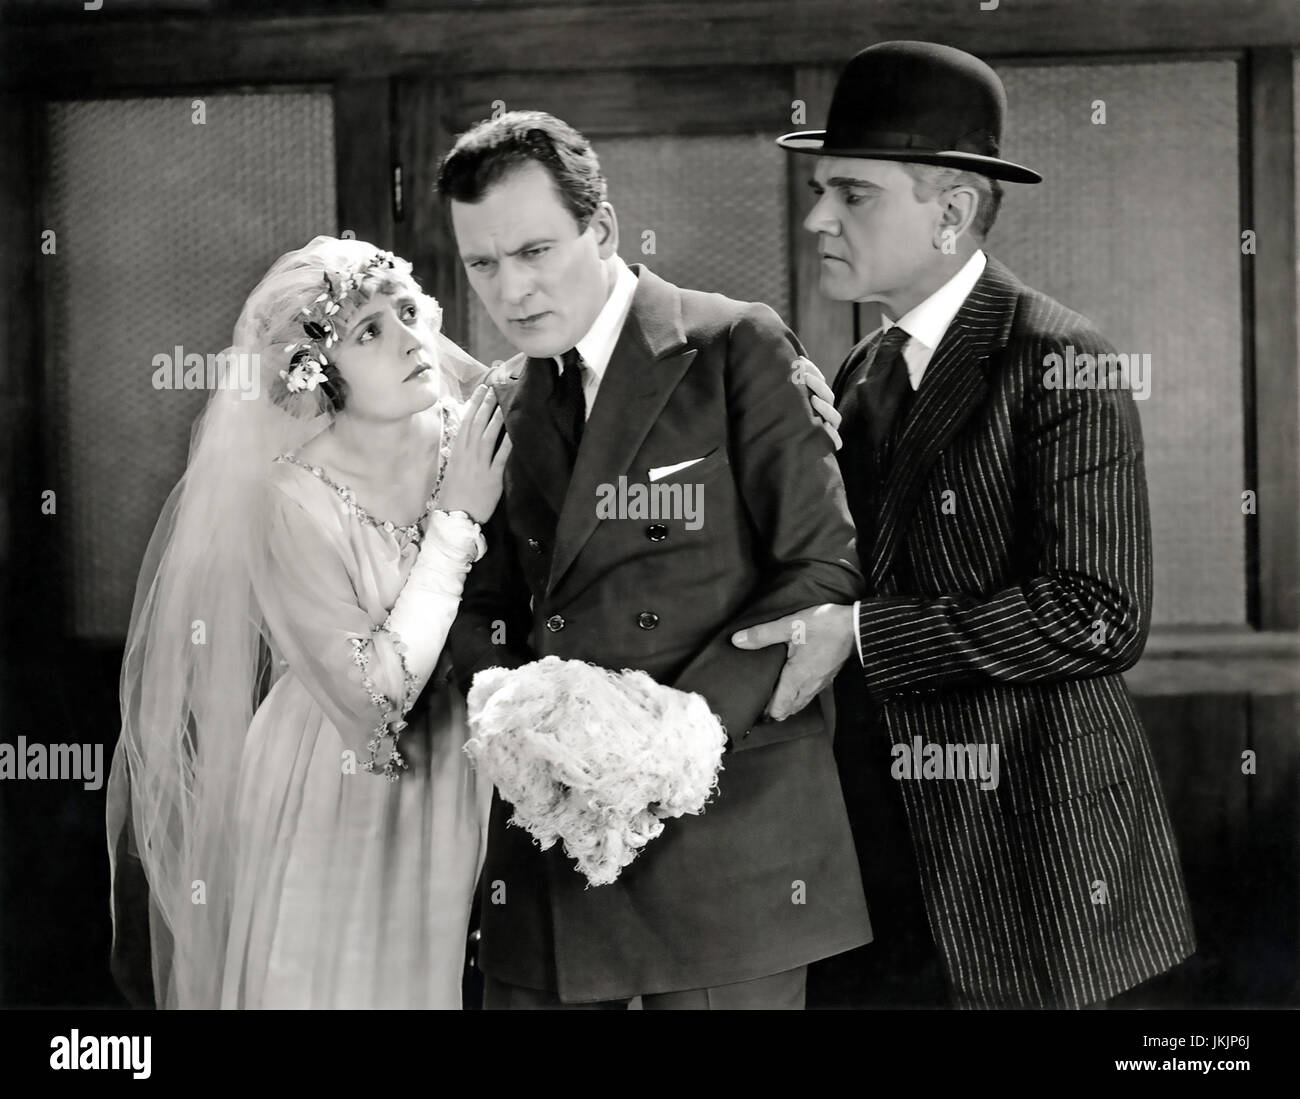 CITY OF SILENT MEN 1921 Paramount Pictures silent  film with from left Lois Wilson, Thomas Meighan, George MacQuarrie Stock Photo